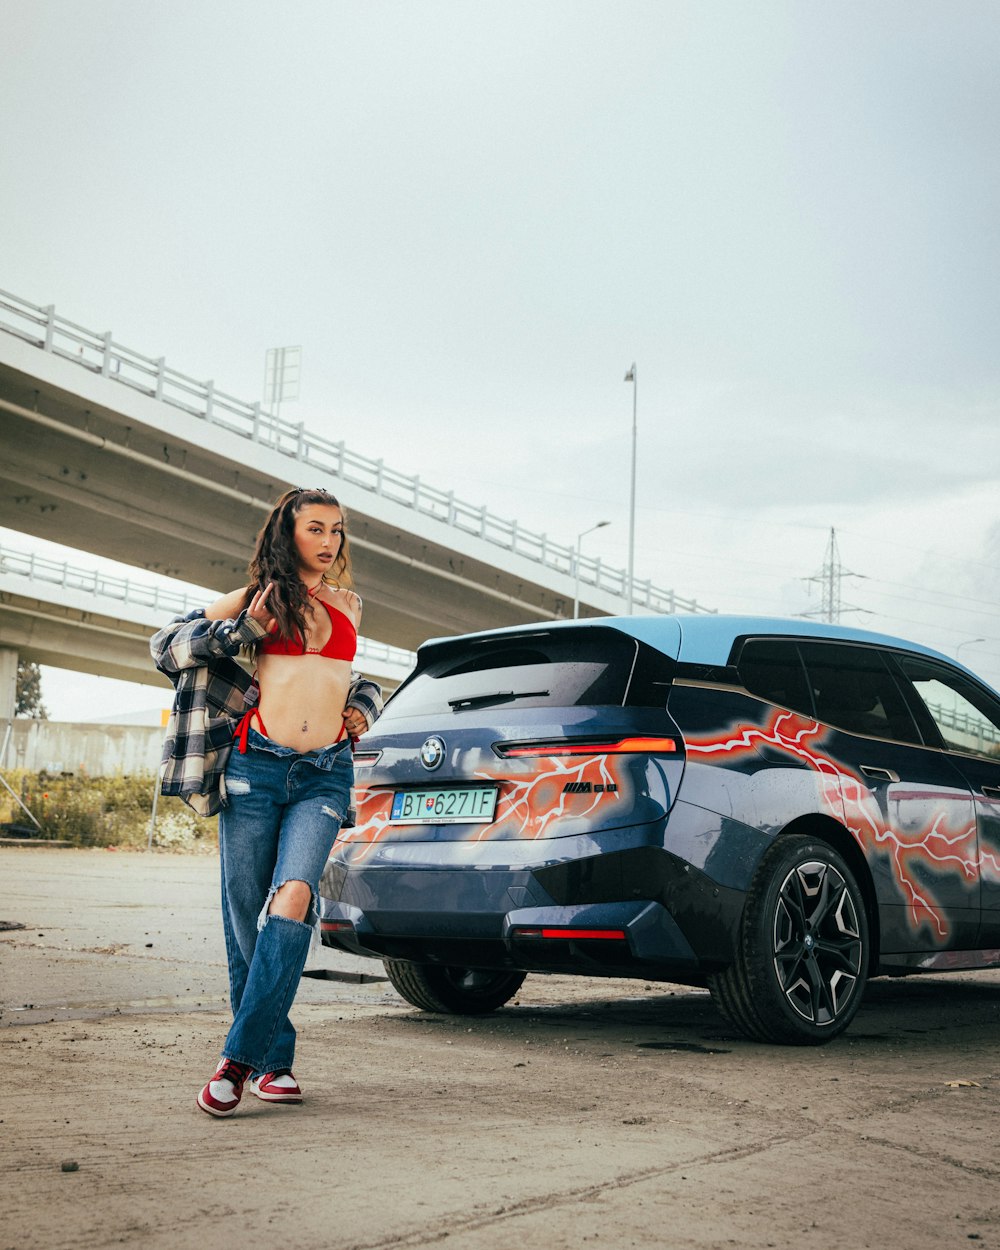 a woman standing next to a car with graffiti on it